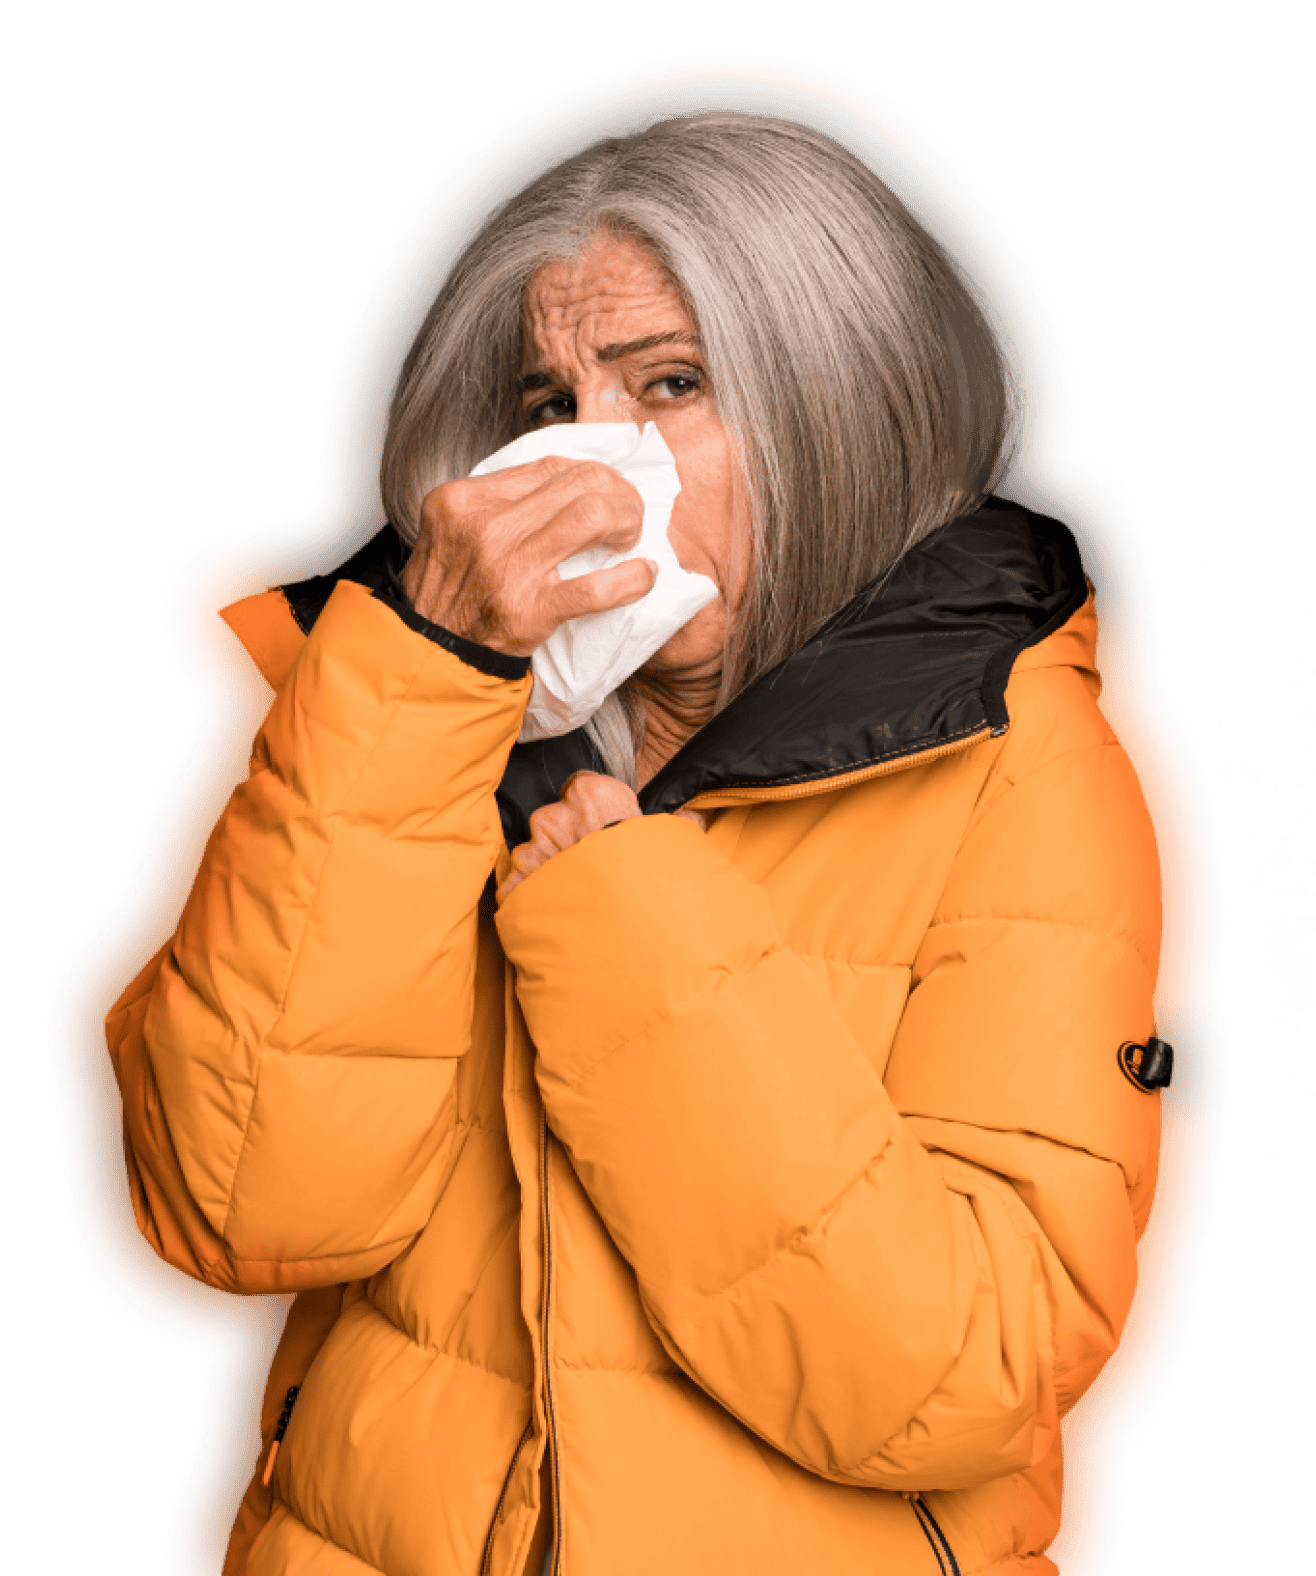 Elderly woman in an orange jacket holding a tissue to her nose, appearing to sneeze or blow her nose.